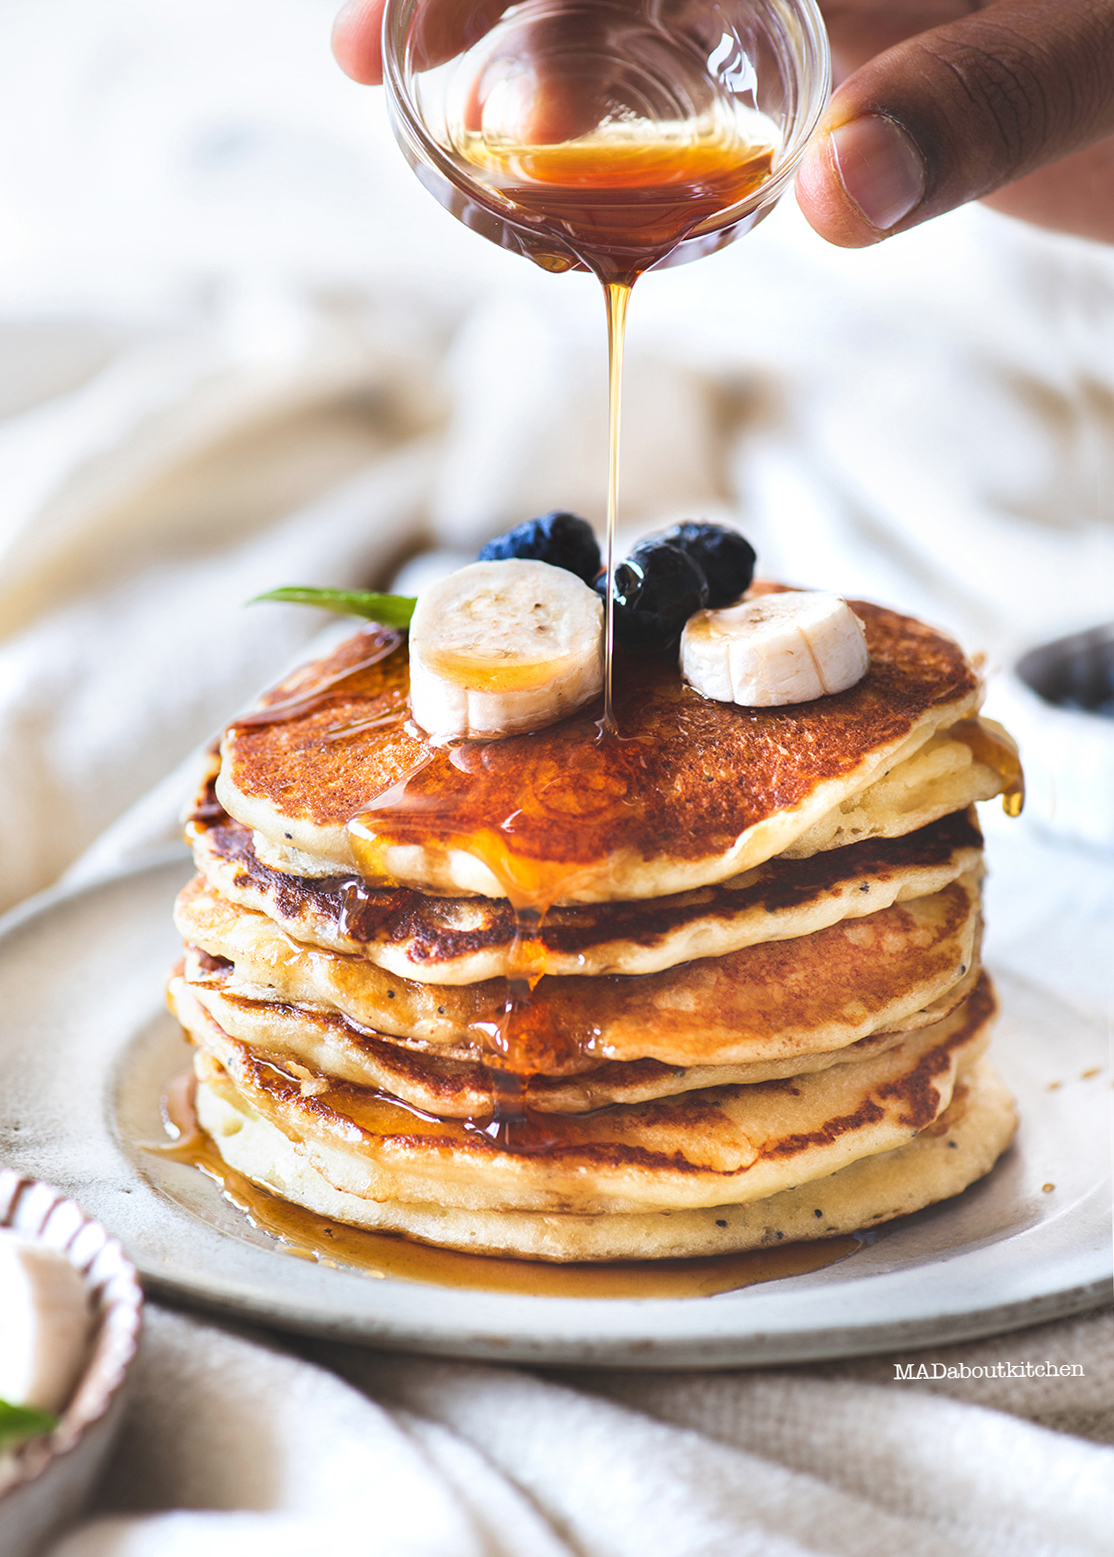 Ricotta Pancakes or Chenna pancakes are one of the most fluffiest of pancakes. Adding cheese makes the pancakes so much more fluffier.